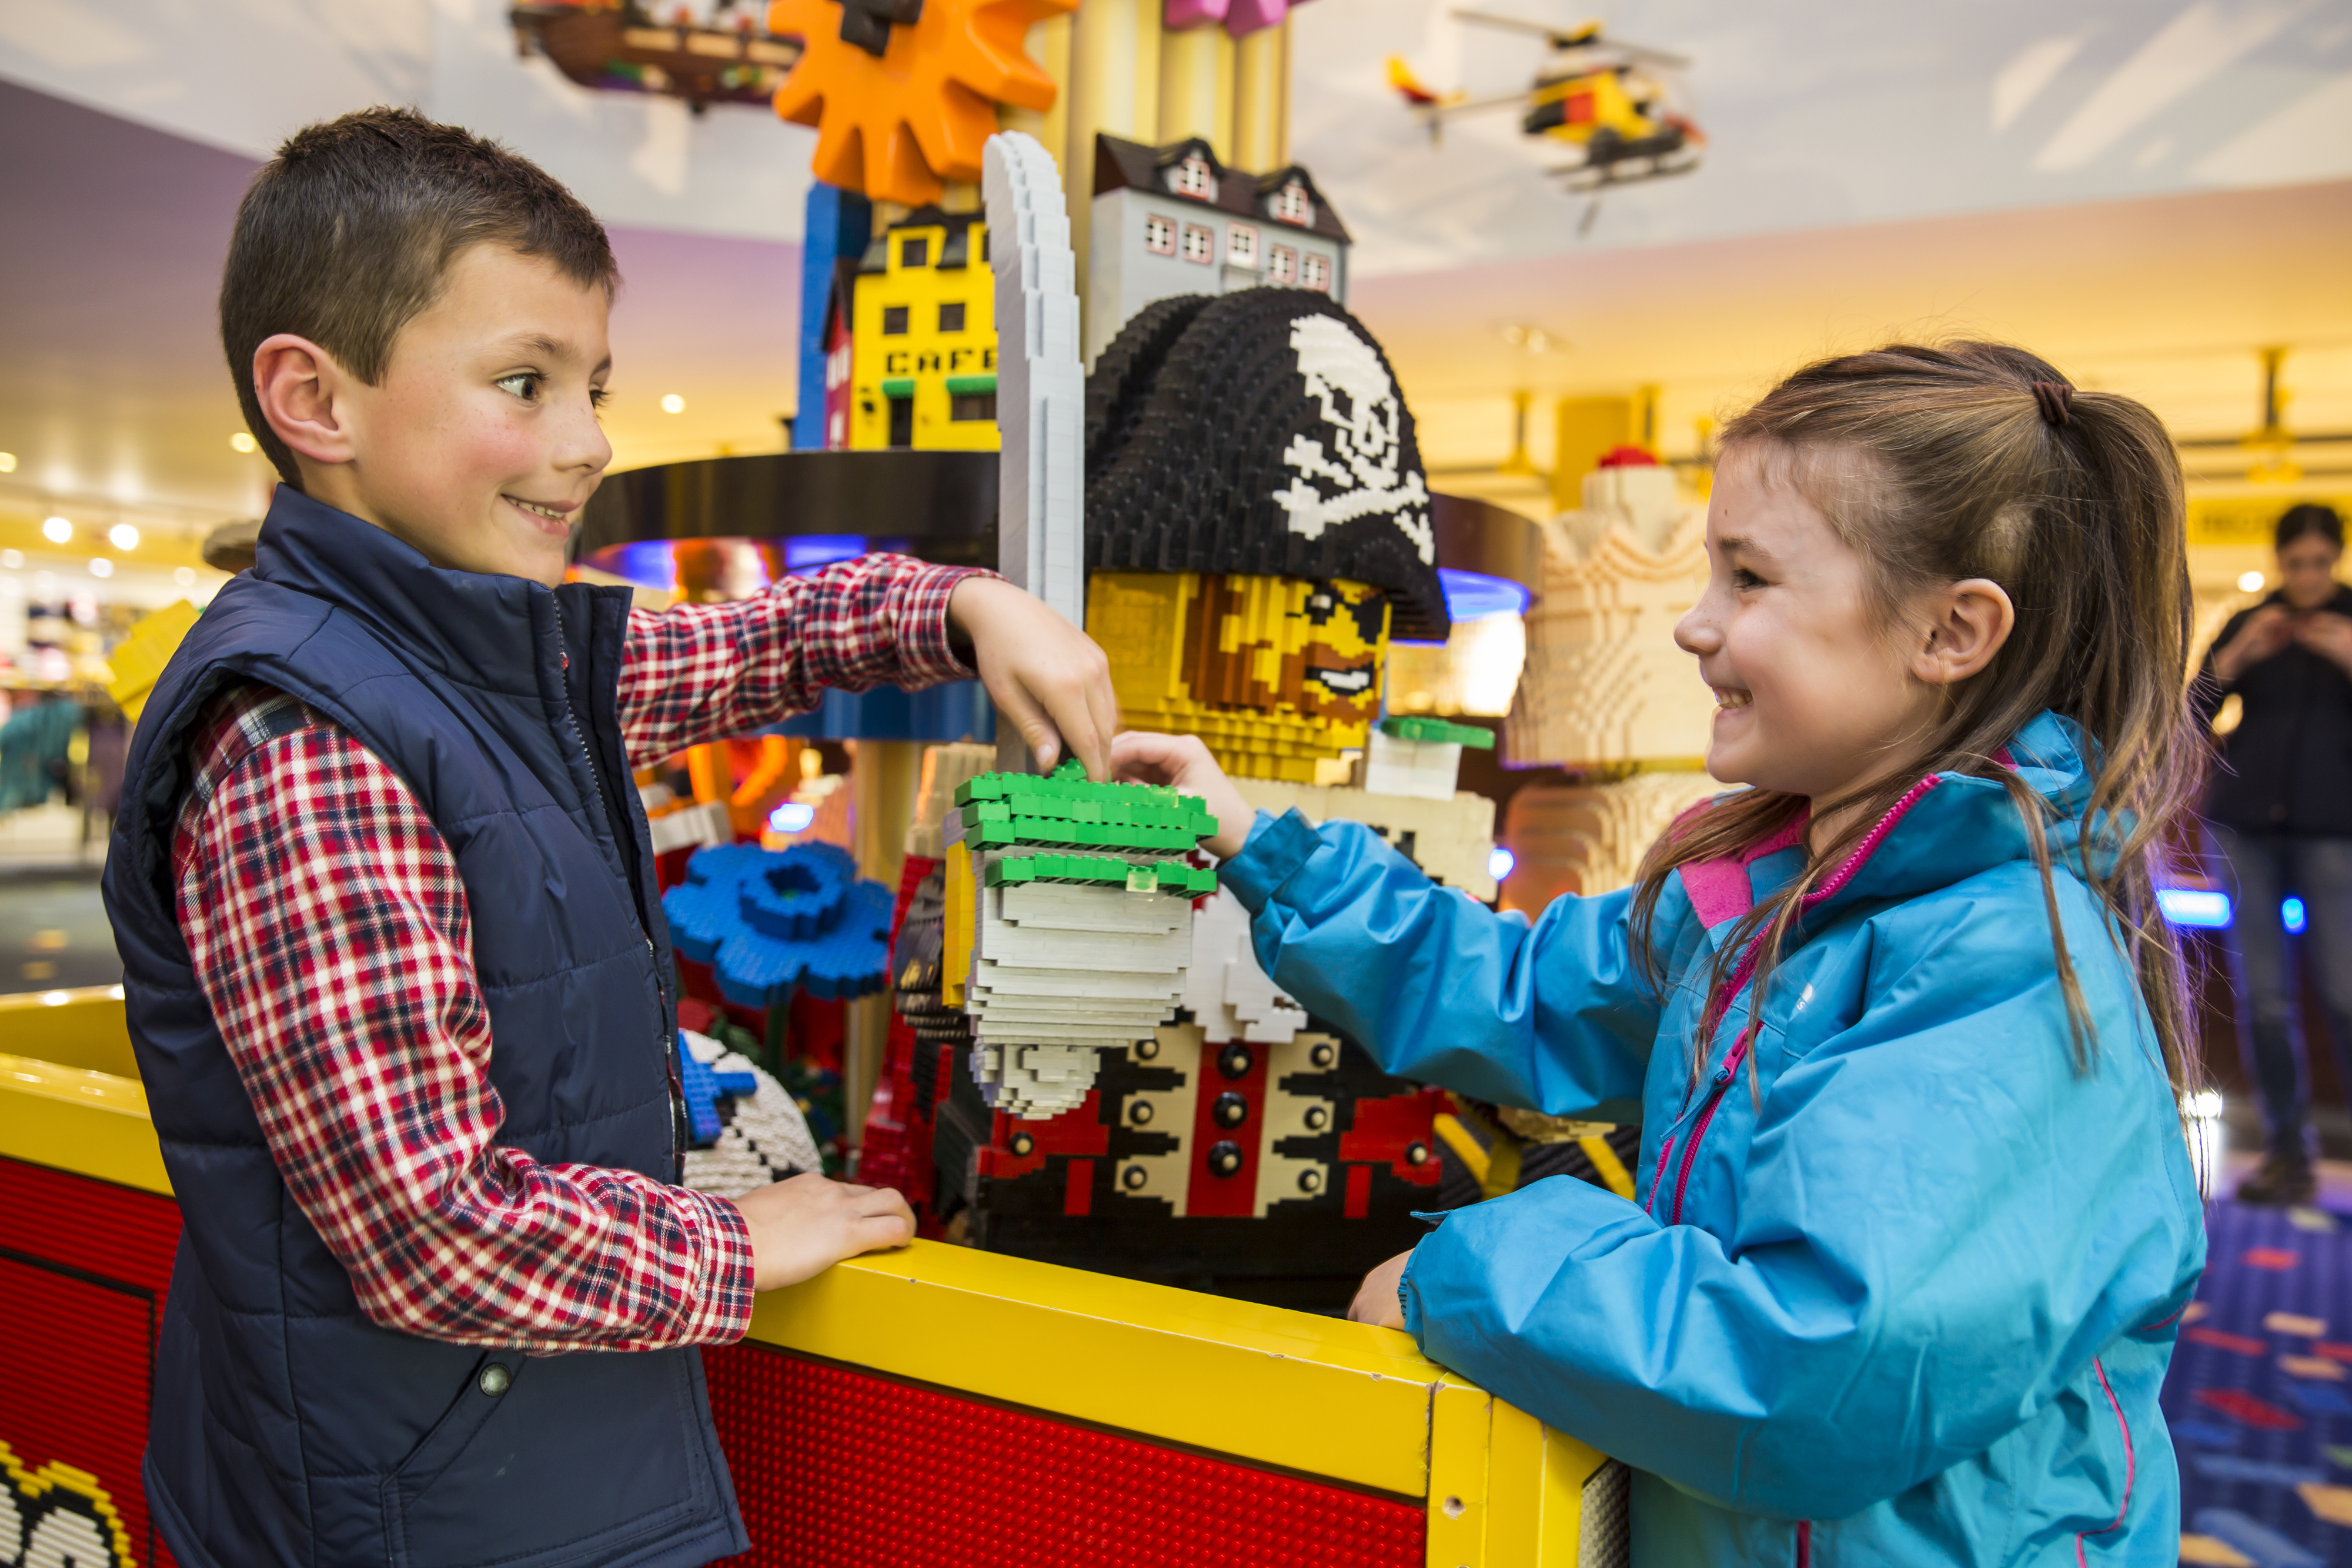 Children interacting with LEGO models in the Reception of the LEGOLAND Resort Hotel